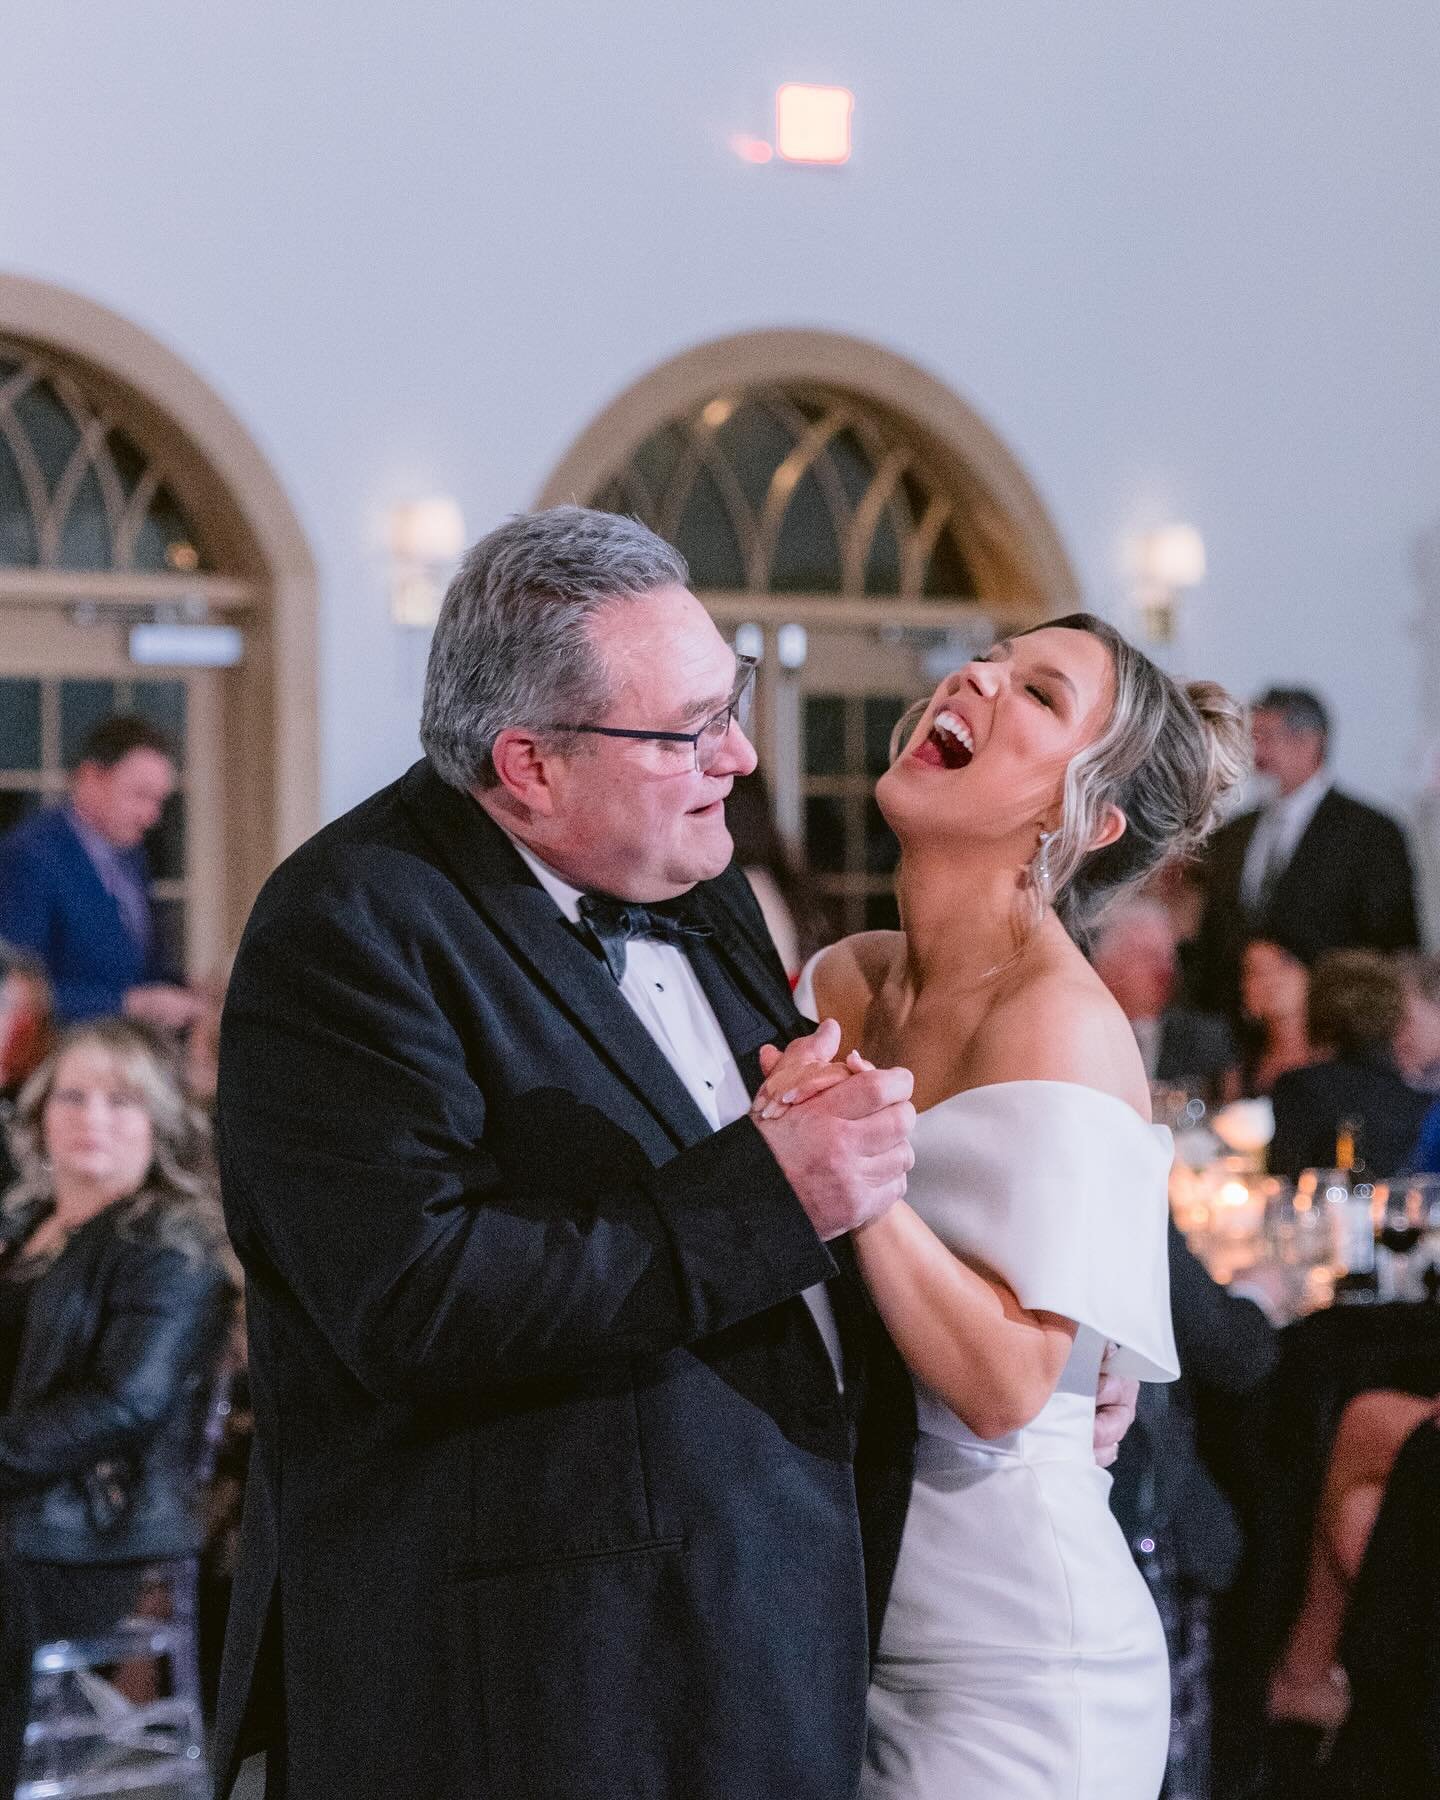 The father-daughter dance is always equal parts laughs and happy tears. 🤍

Venue &amp; Dancefloor: @westwind_hills 
Photographer: @steph.masat 
Florals: @rootandrelic 

#stlouiswedding #missouriweddings #missouribrides #stlouisweddingvenues #missour